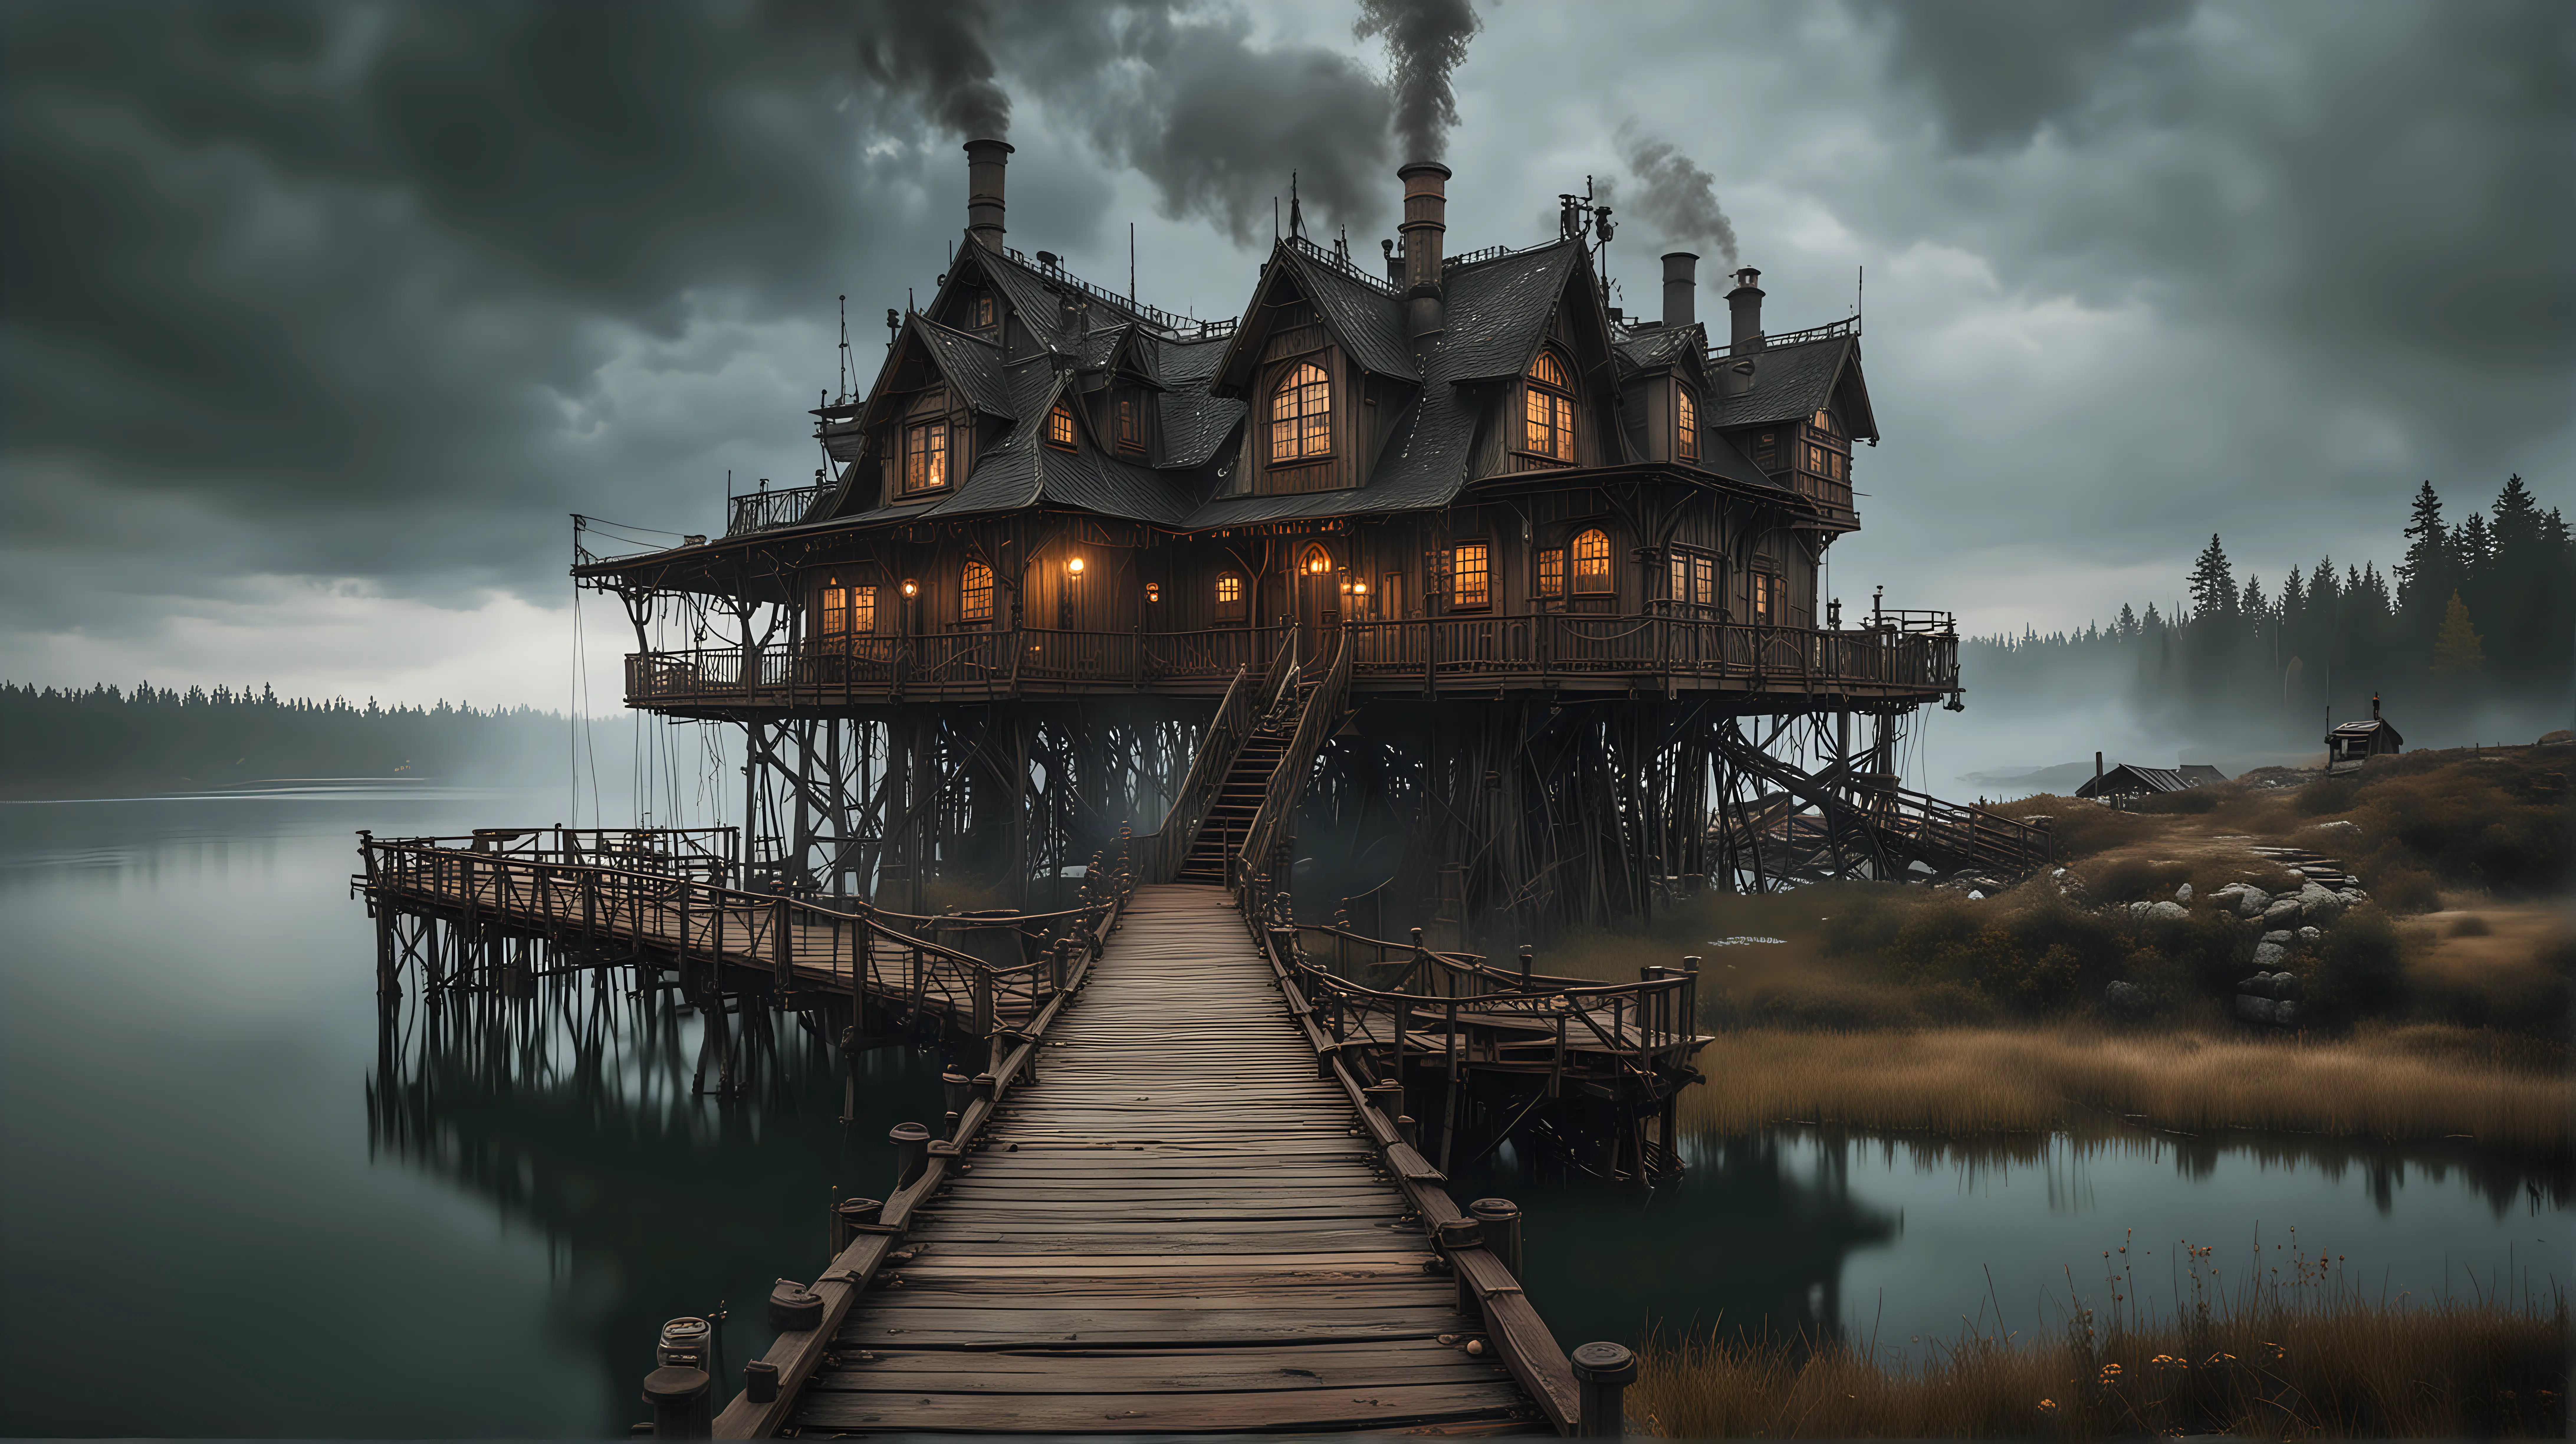 a steampunk house on the wild lake shore with a long wooden footbridge, cloudy, almost dark, much steam and smoke